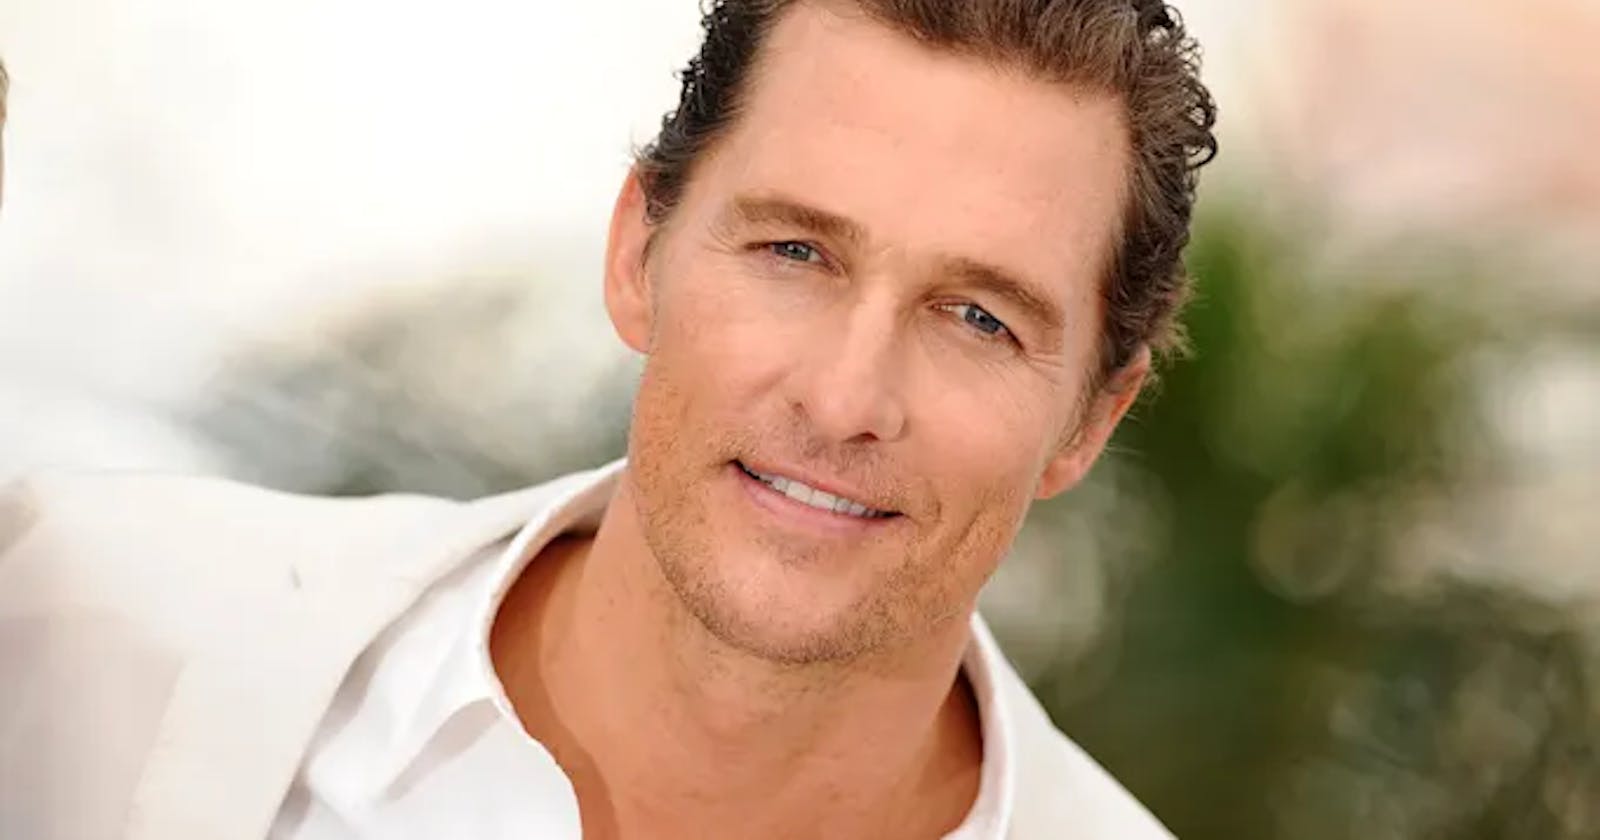 The Mystery Solved: How Old Is Matthew McConaughey?